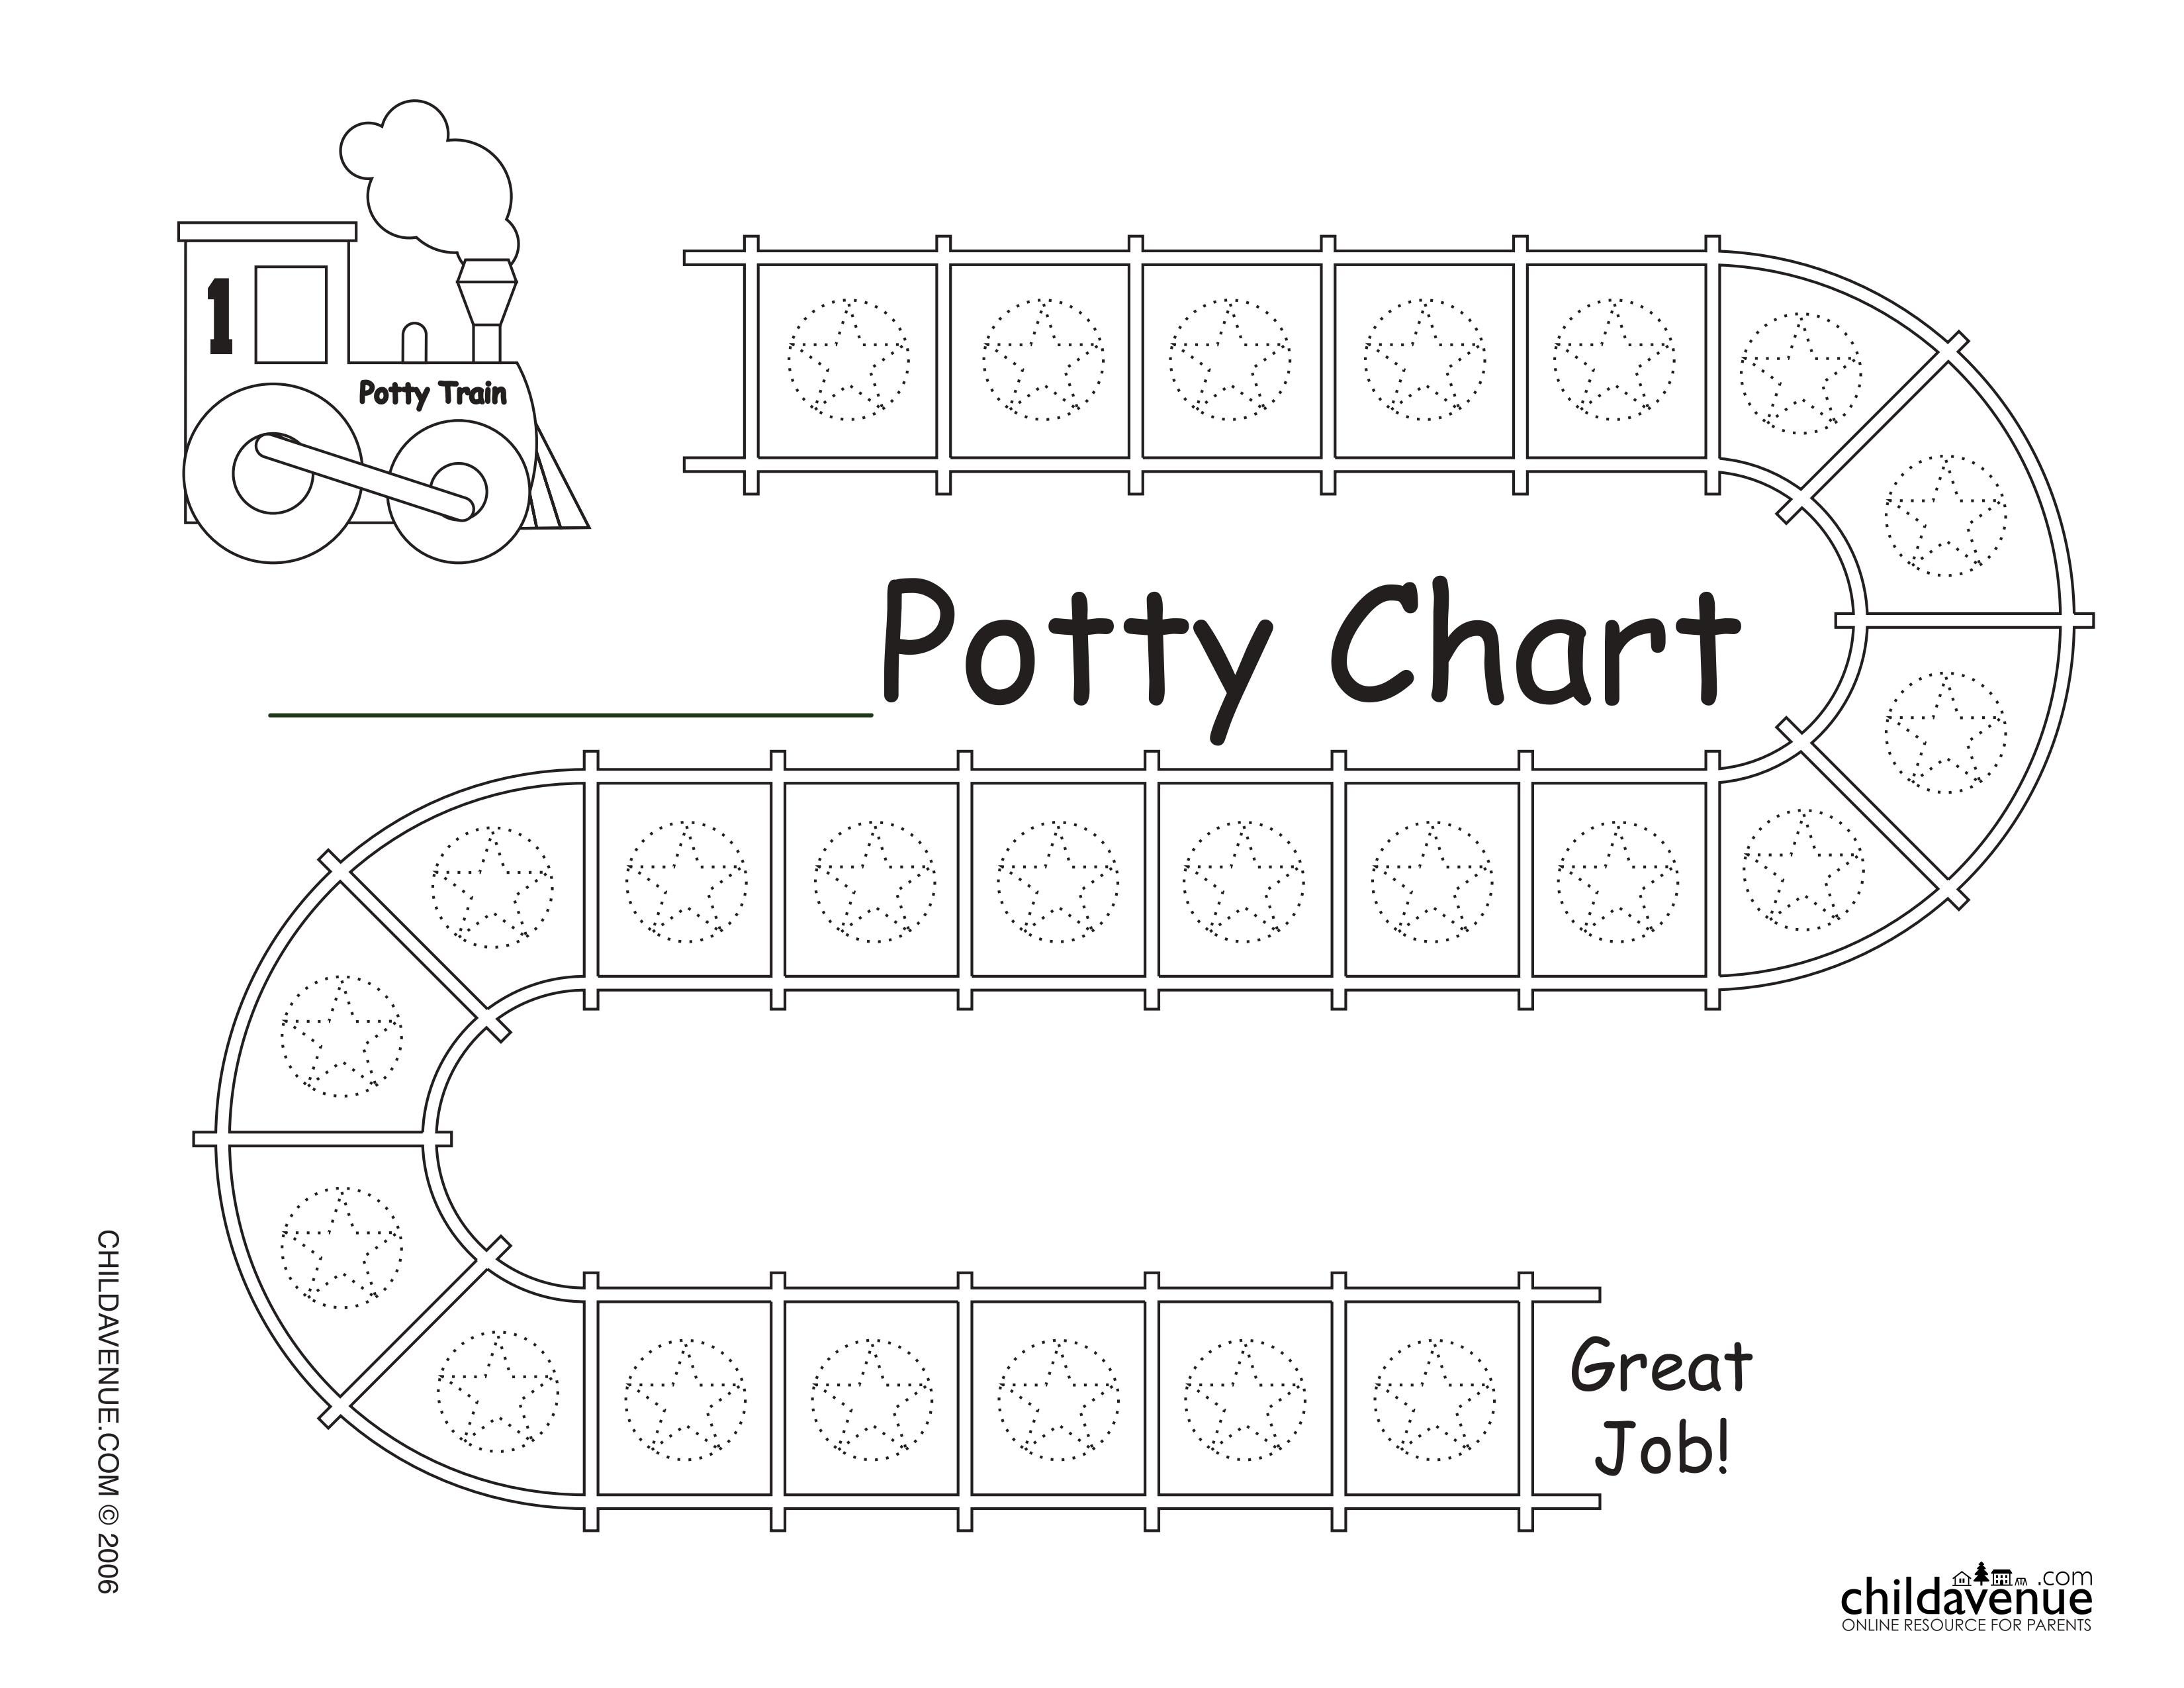 free-printable-train-potty-sticker-charts-top-3-potty-training-supplies-for-boys-home-ever-after